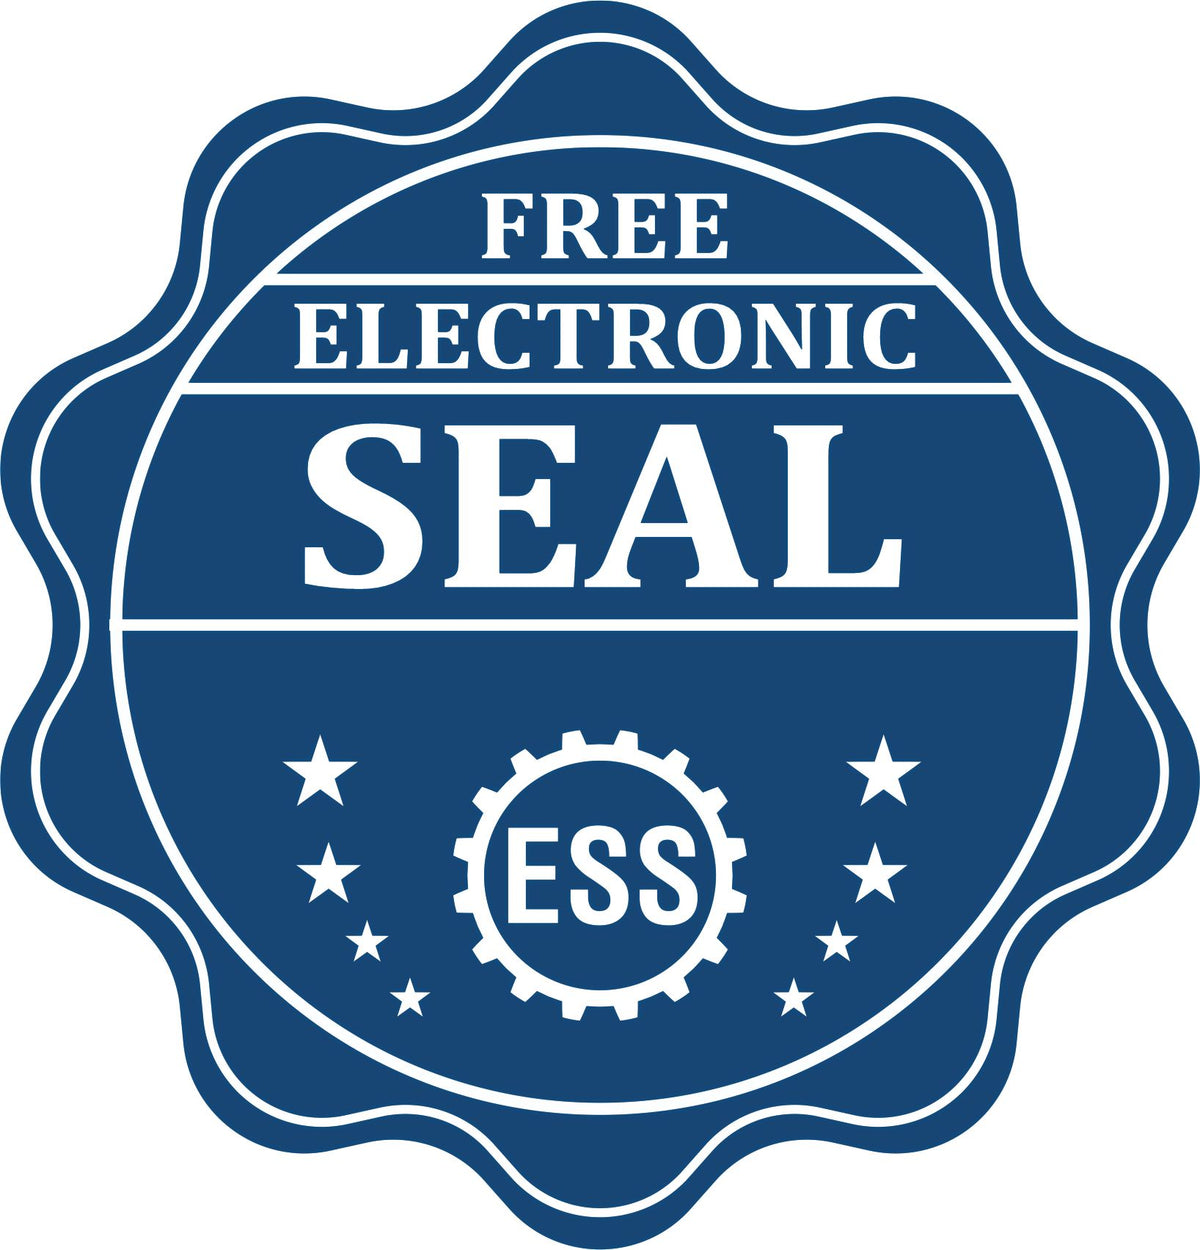 A badge showing a free electronic seal for the State of Kentucky Long Reach Architectural Embossing Seal with stars and the ESS gear on the emblem.